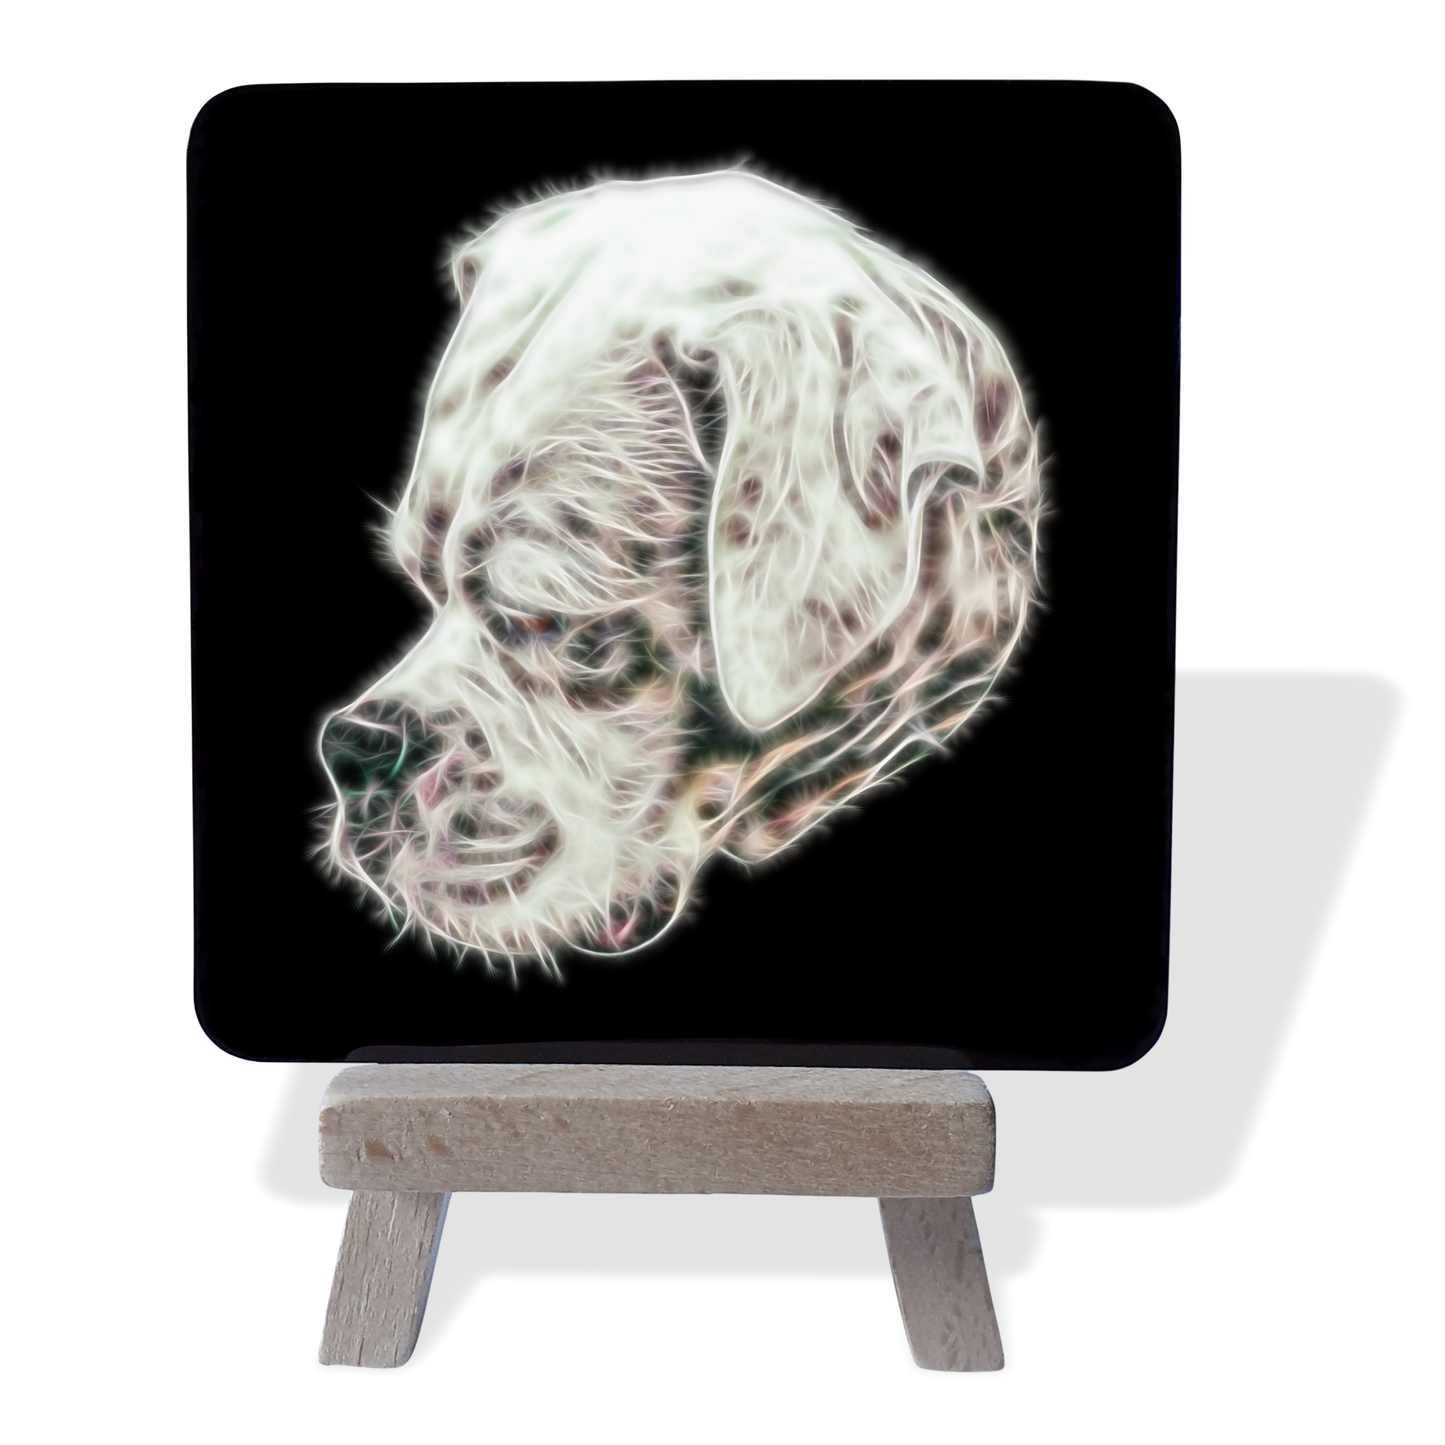 Boxer -White Boxer #1 Metal Plaque and Mini Easel with Fractal Art Design